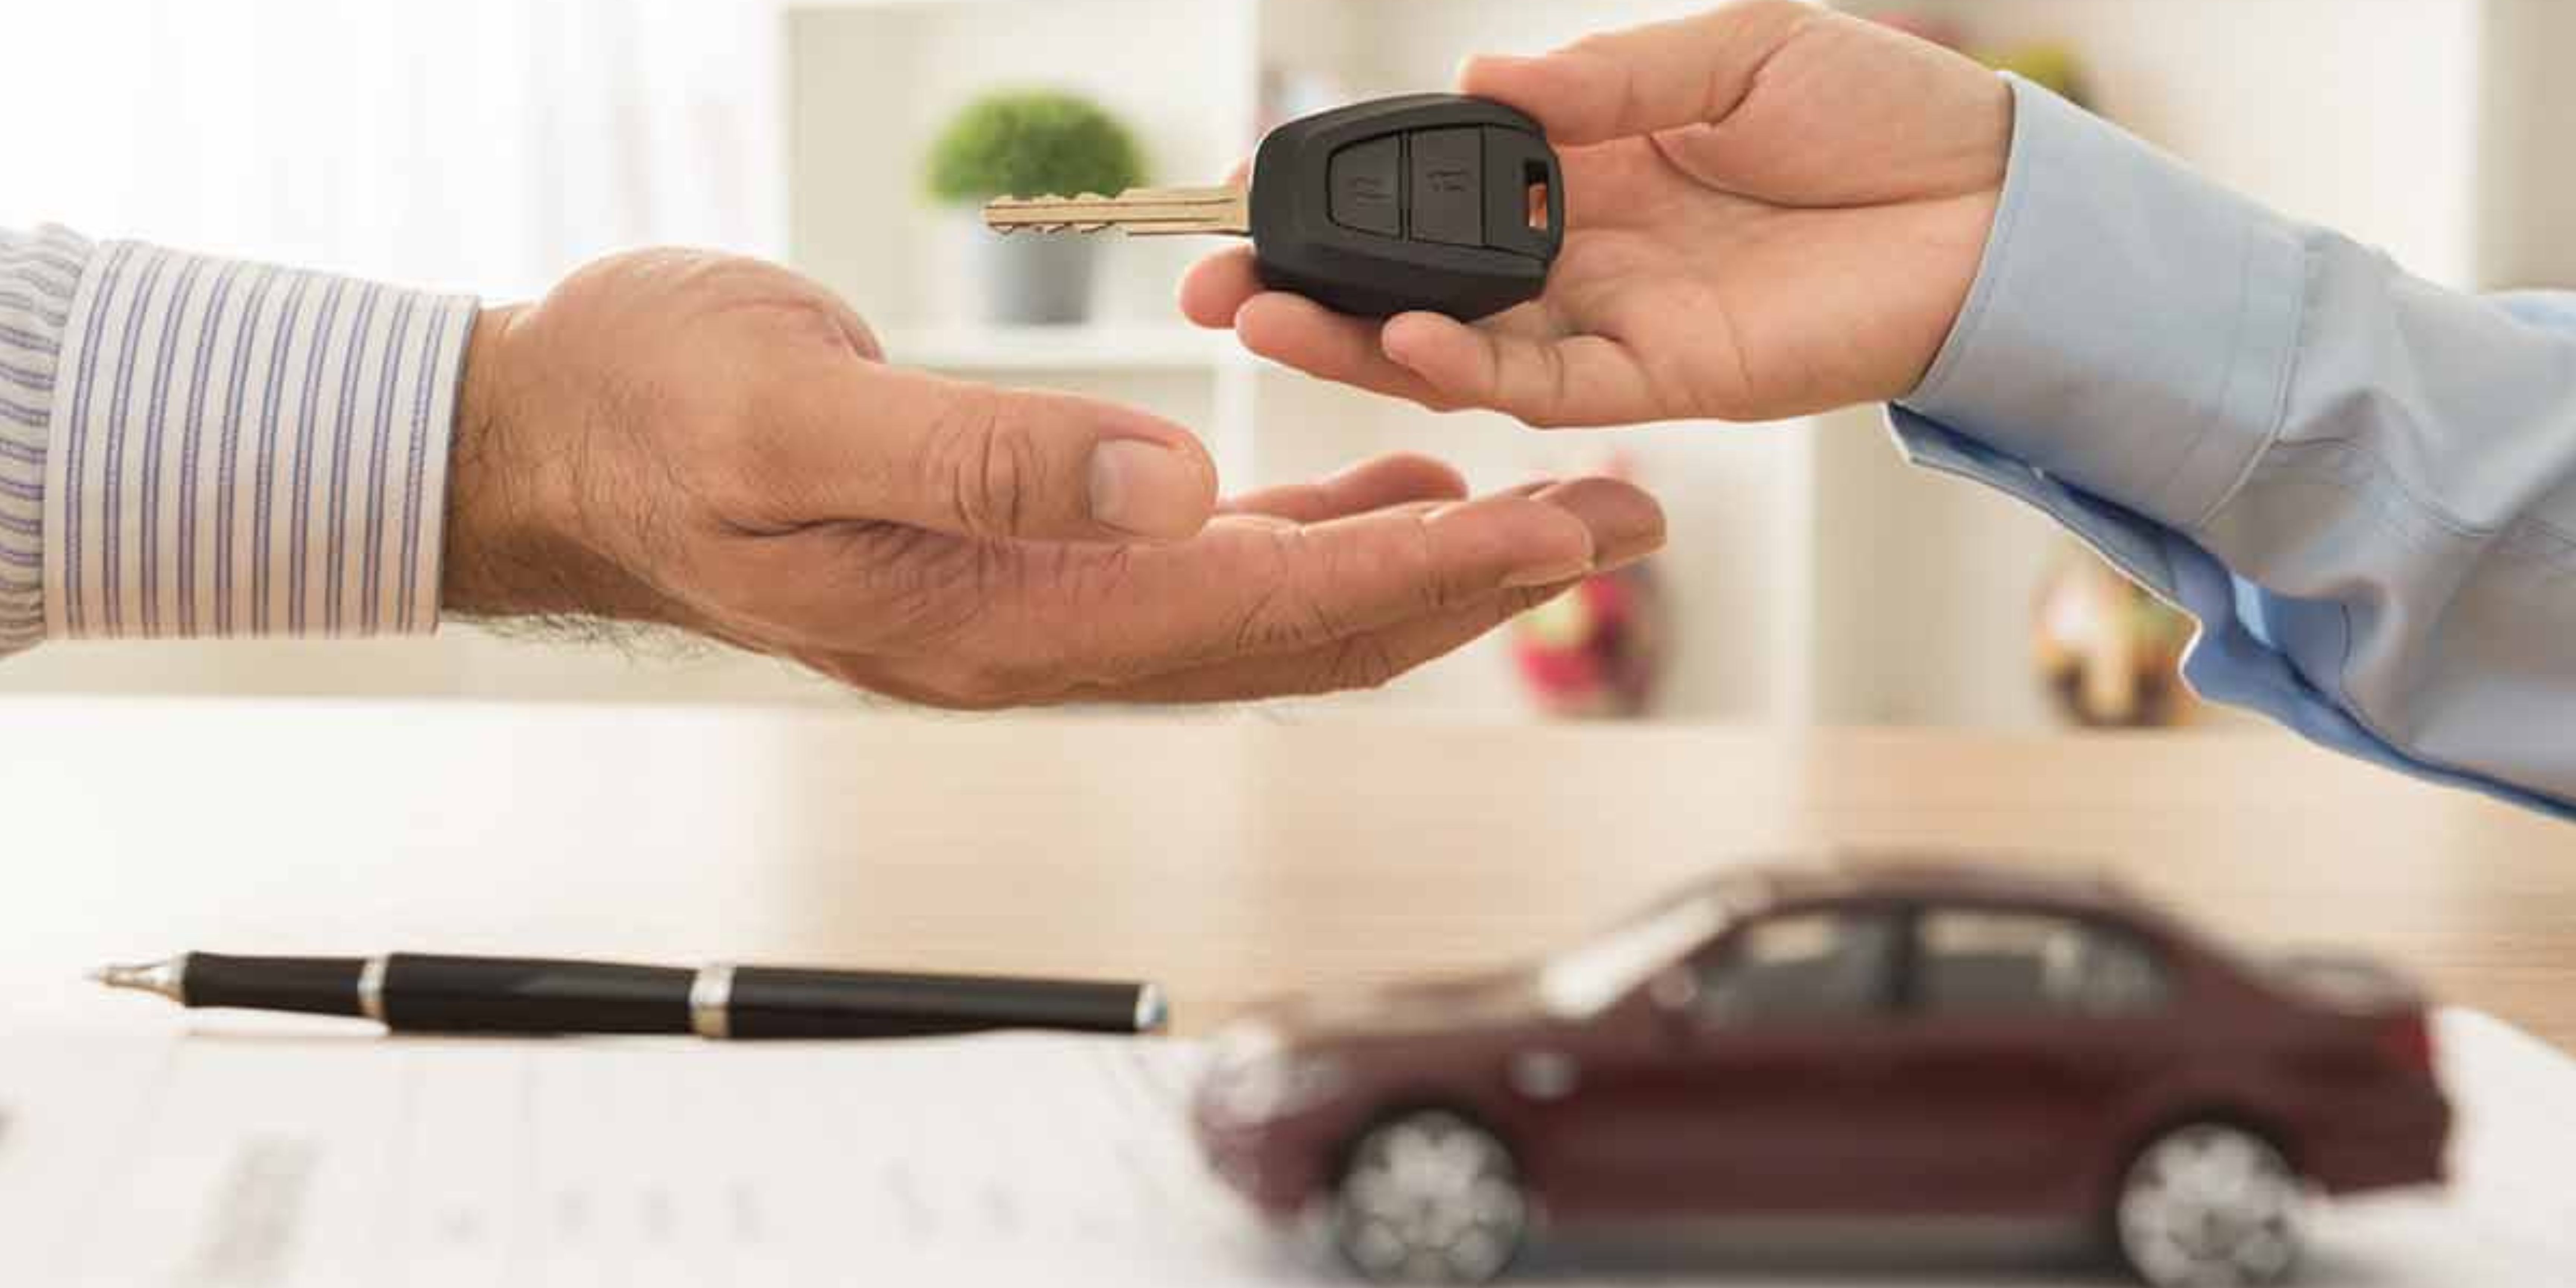 Is taking a car on lease a better option than owning?